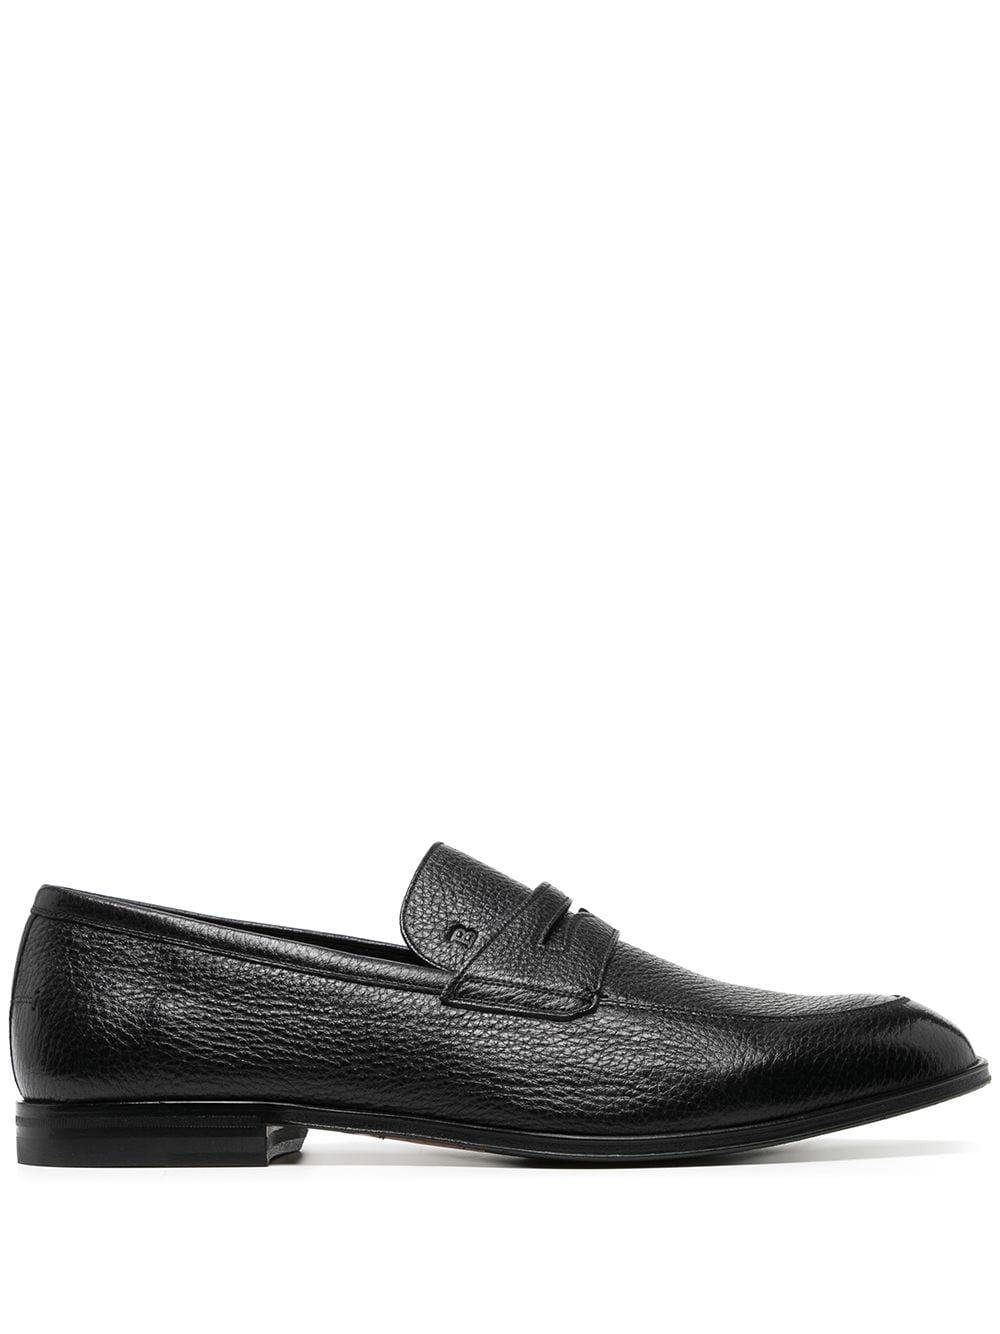 Bally pebbled-texture loafers | Smart Closet